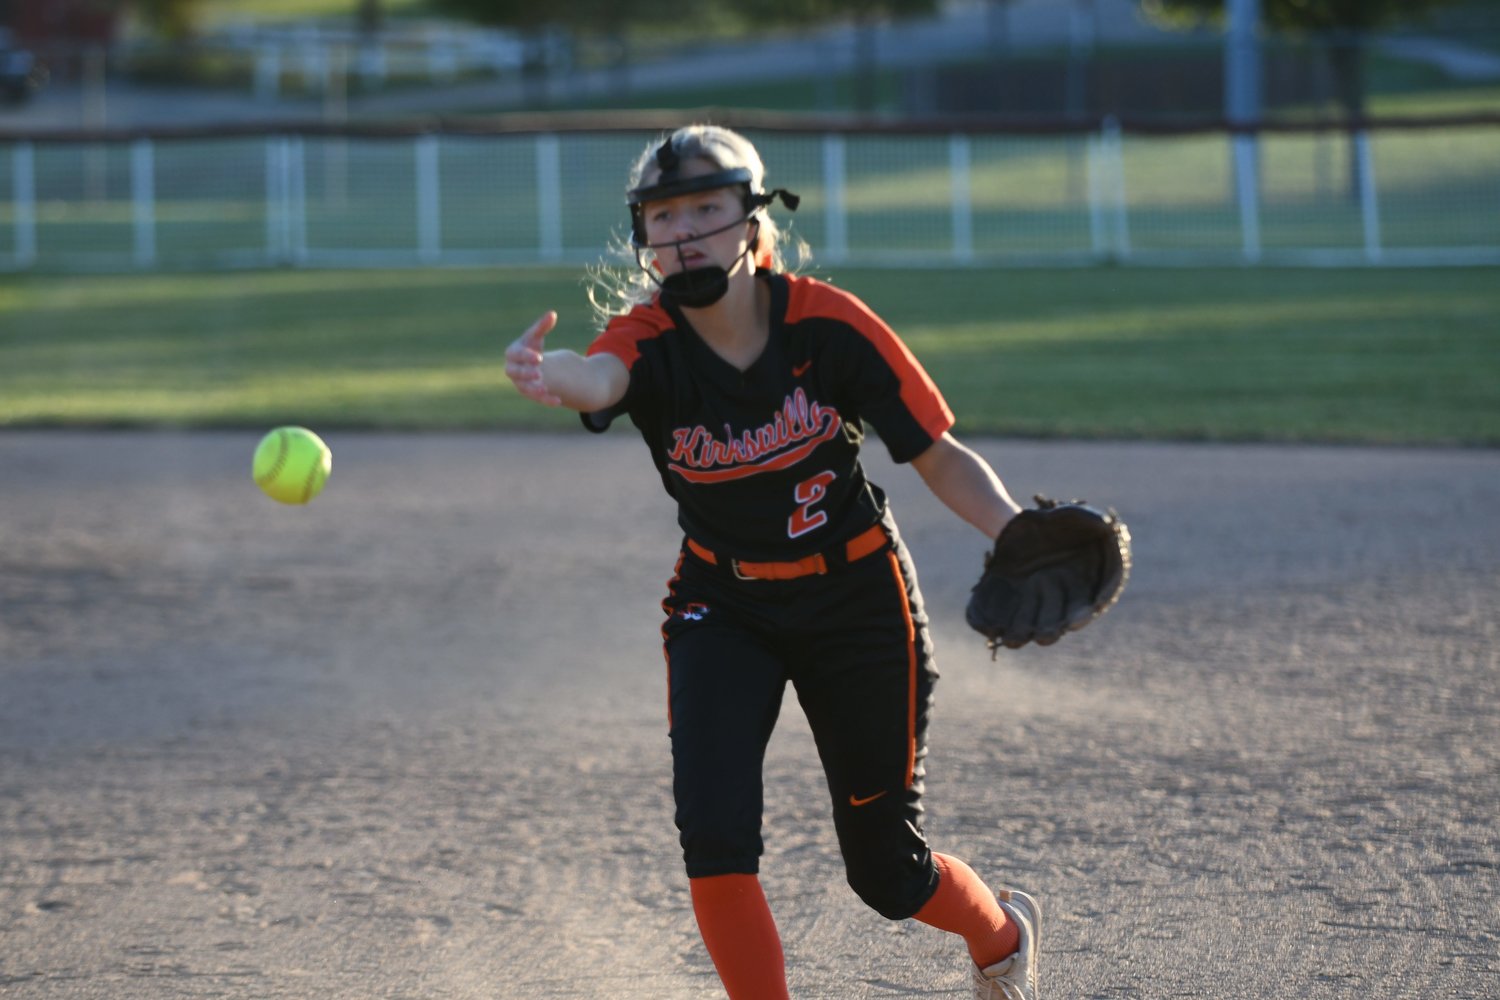 Action from Thursday's district semifinal game between Kirksville and Savannah in Chillicothe.